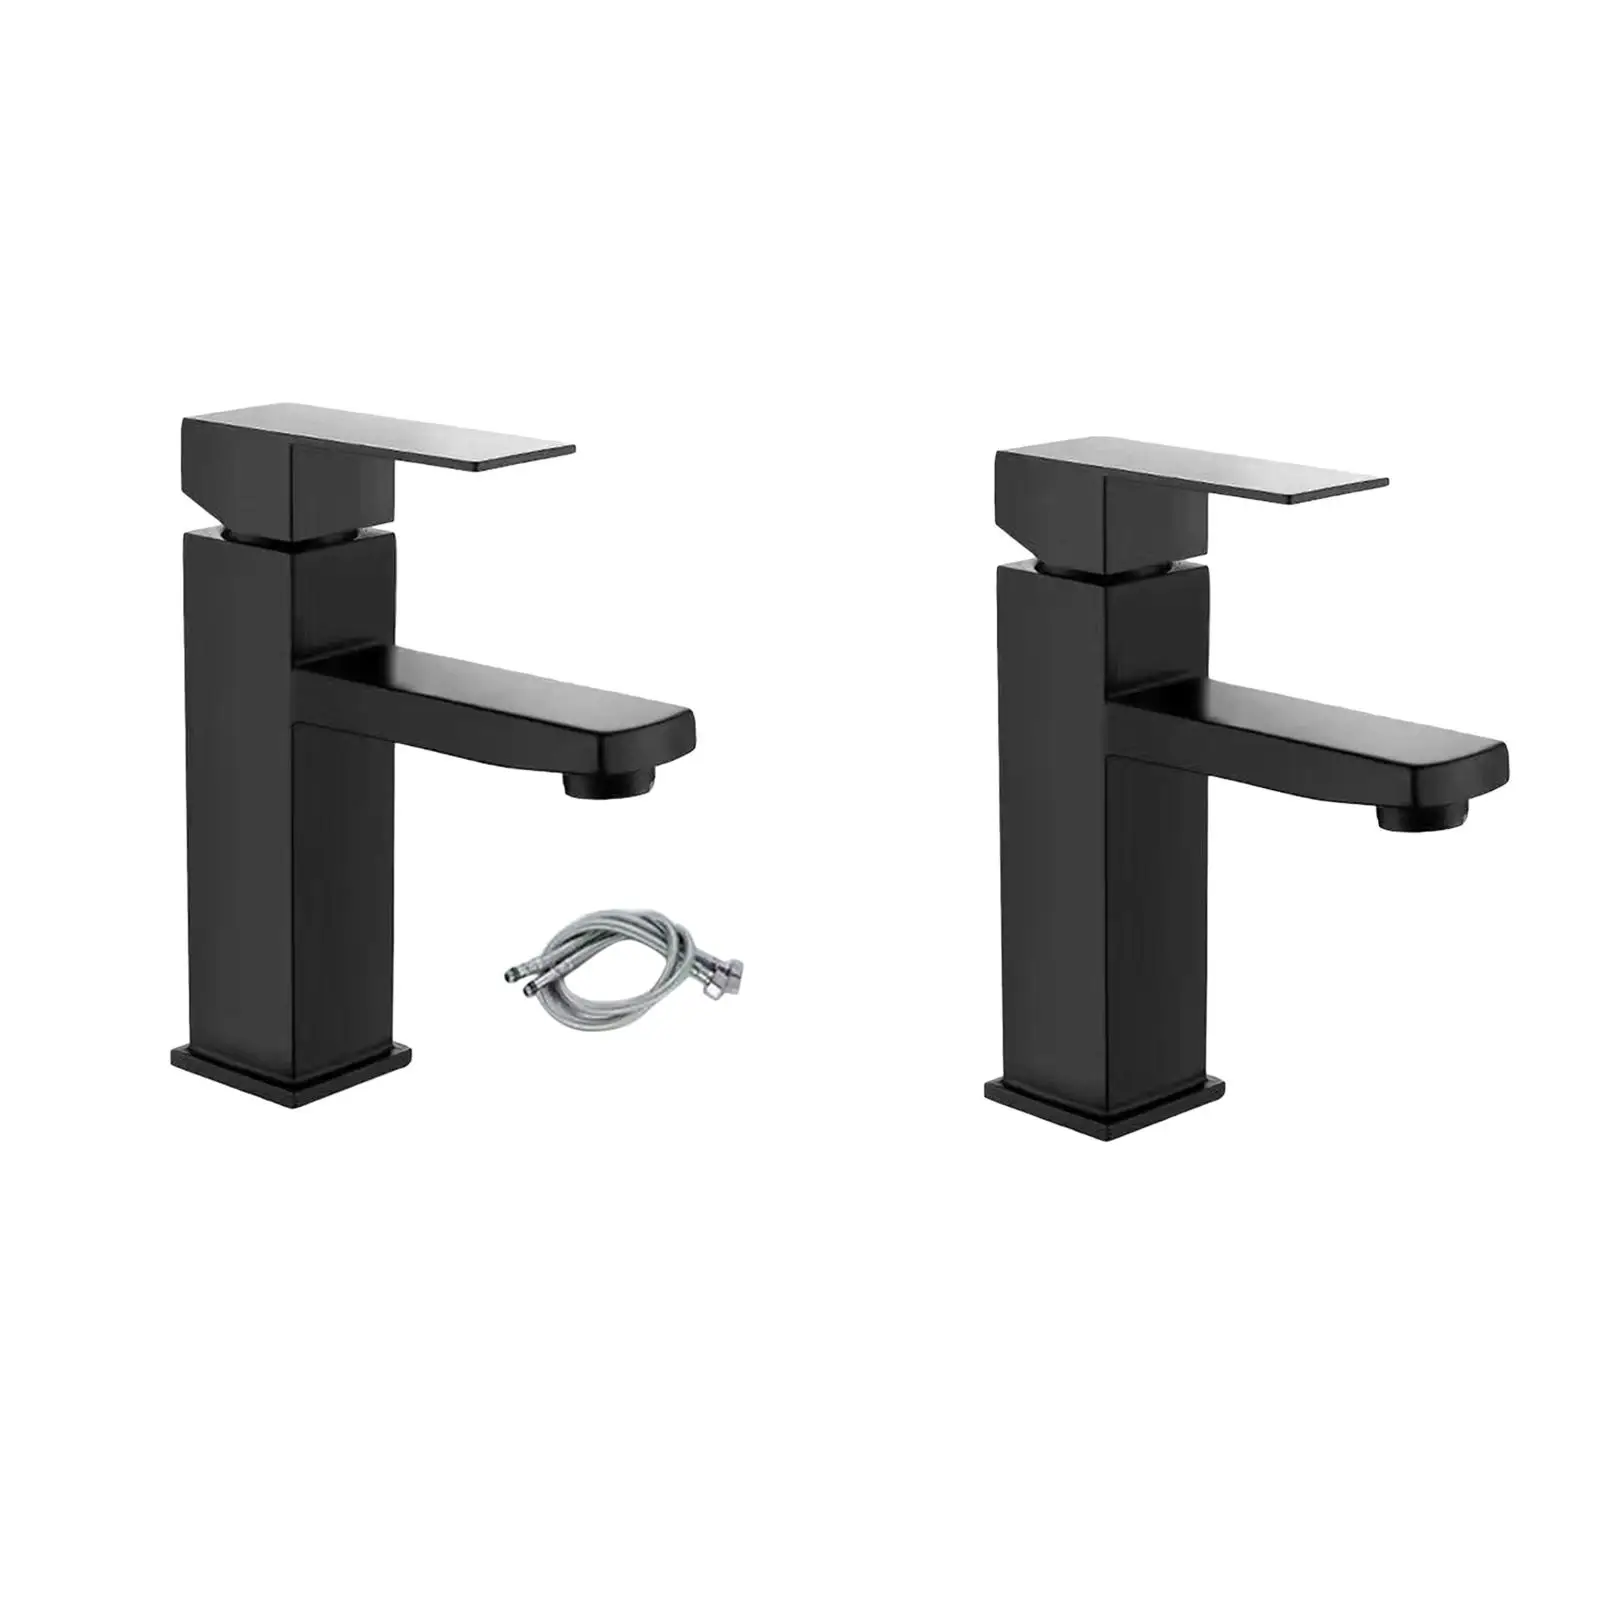 Bathroom Sink Faucet Wash Basin Faucet Easy to Install Black Vanity Faucet for Bathroom Sink for Kitchen